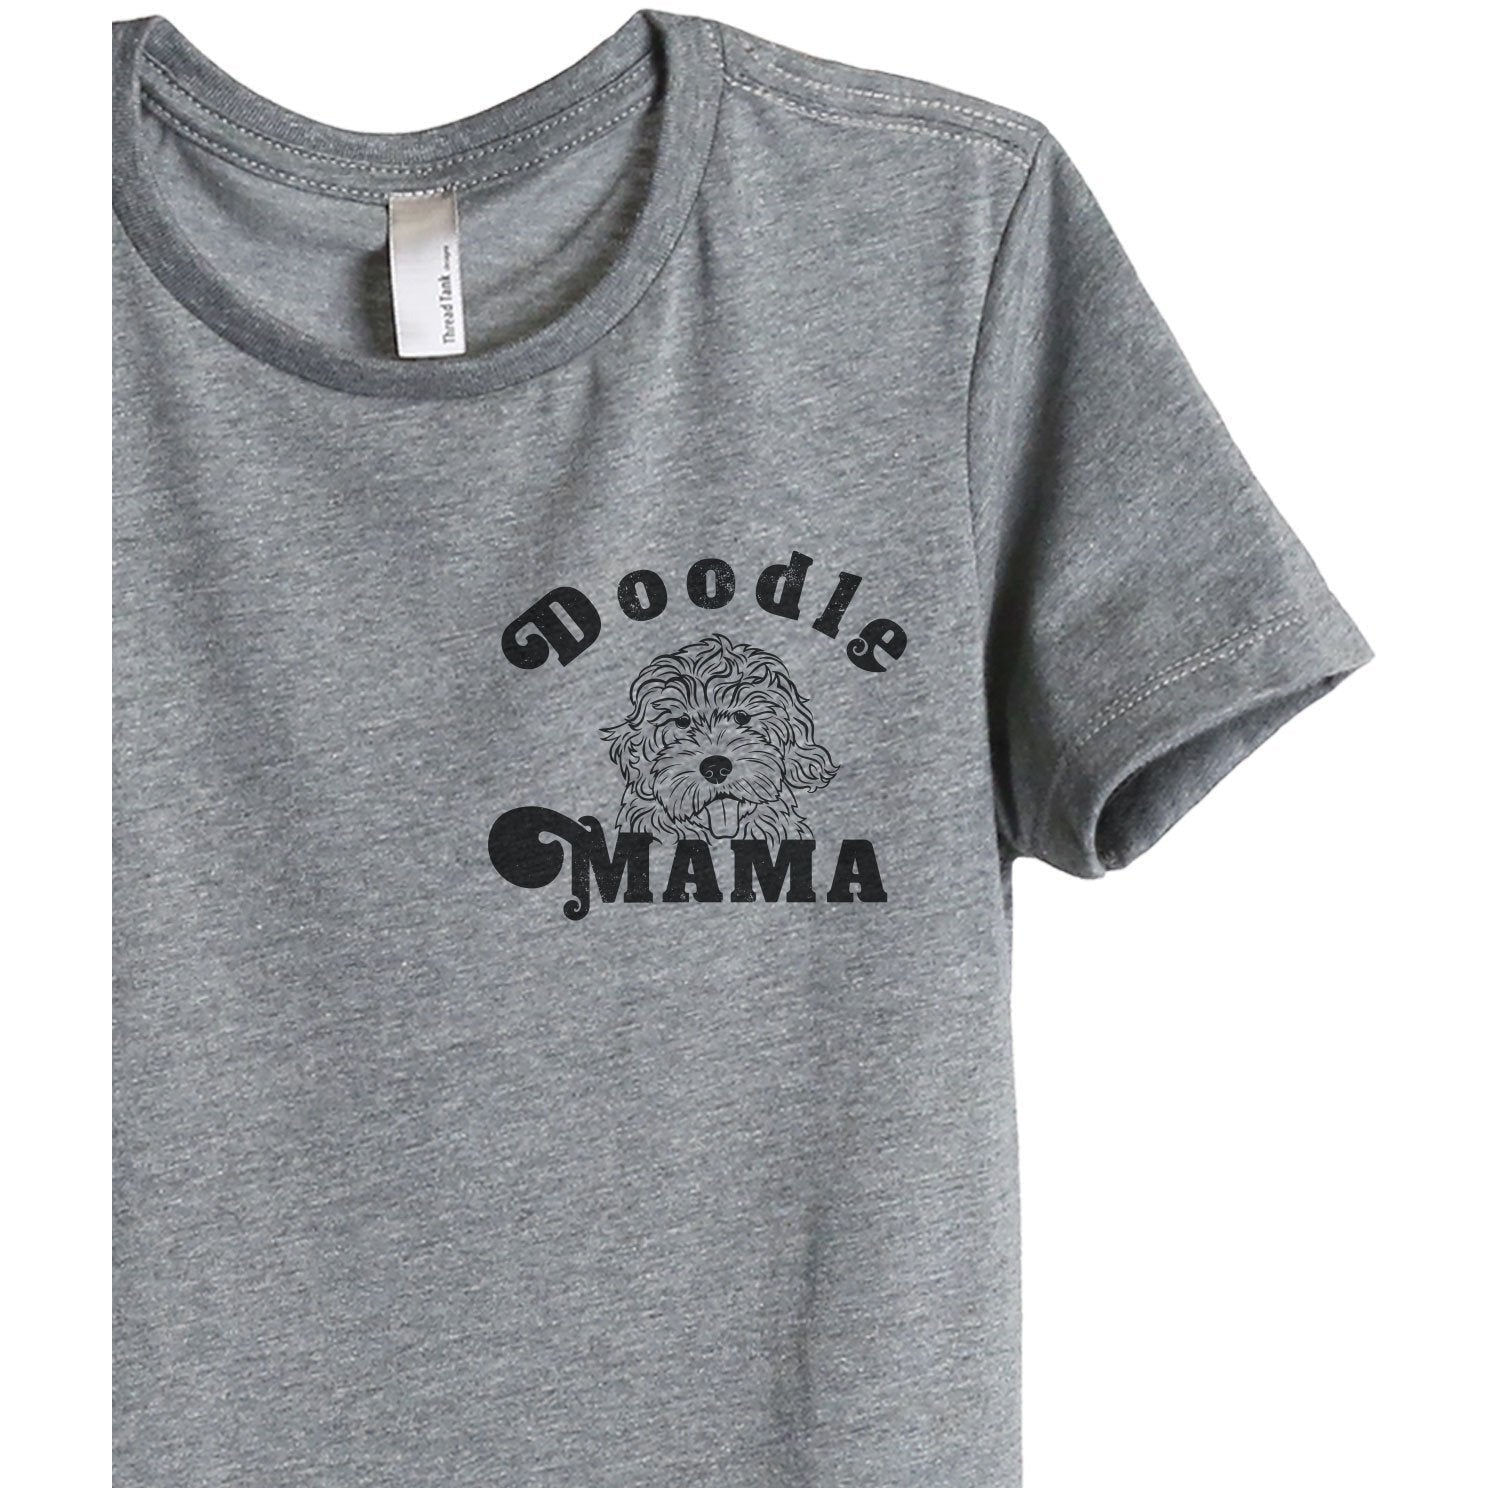 Doodle Mama Women's Relaxed Crewneck T-Shirt Top Tee Heather Grey Zoom Details
